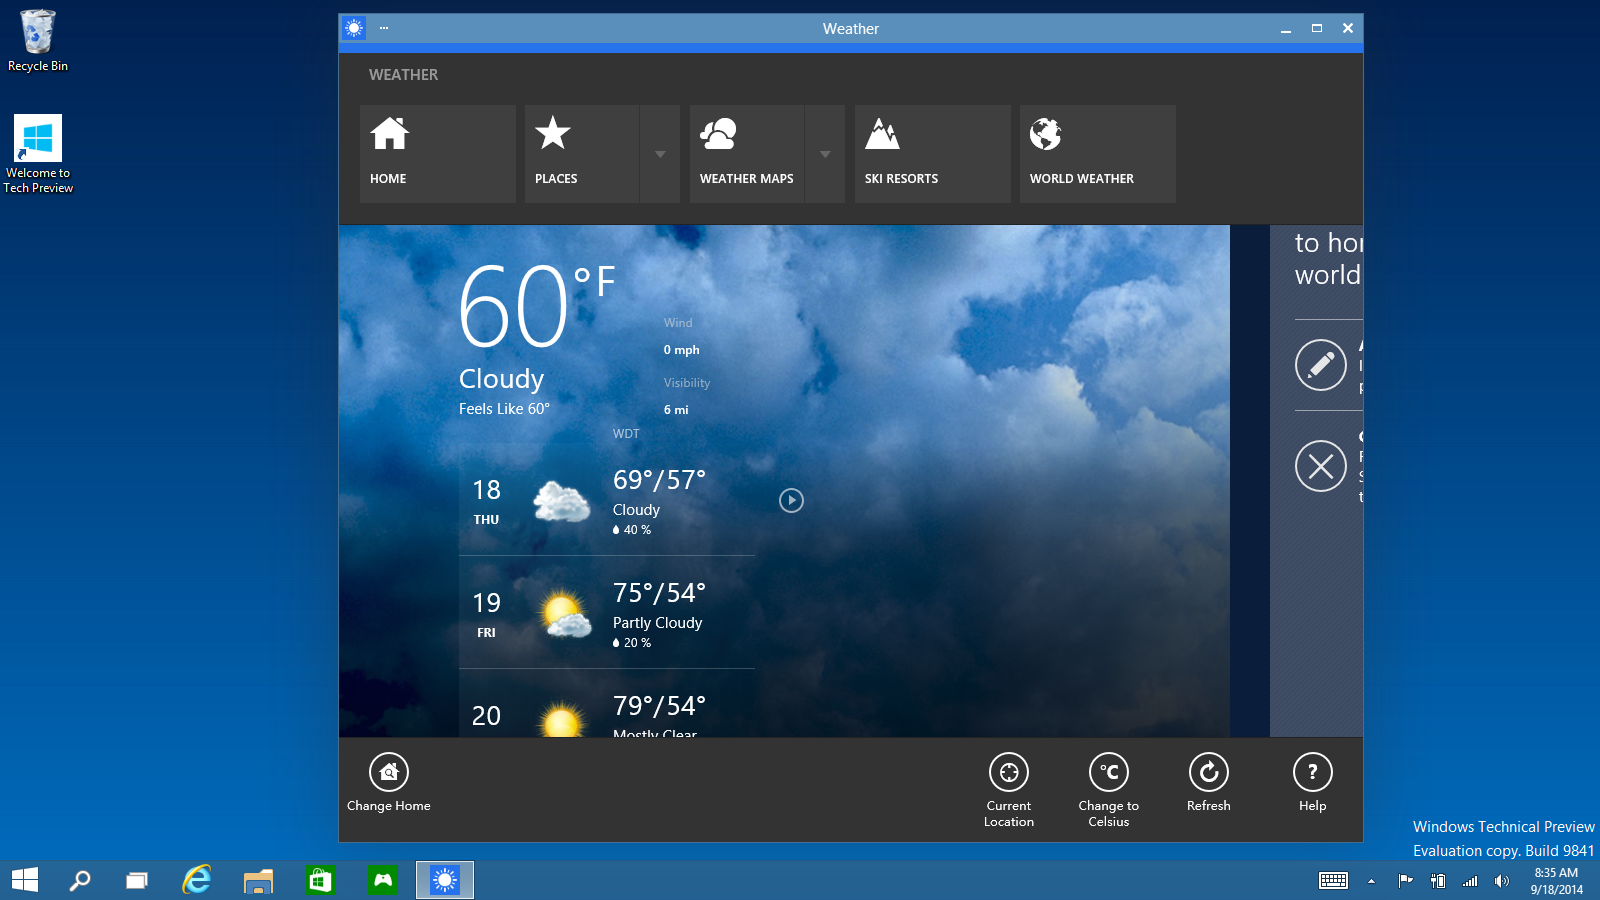 App Commands - Microsoft Unveils Windows 10 with Major Improvements [Download Link Here]